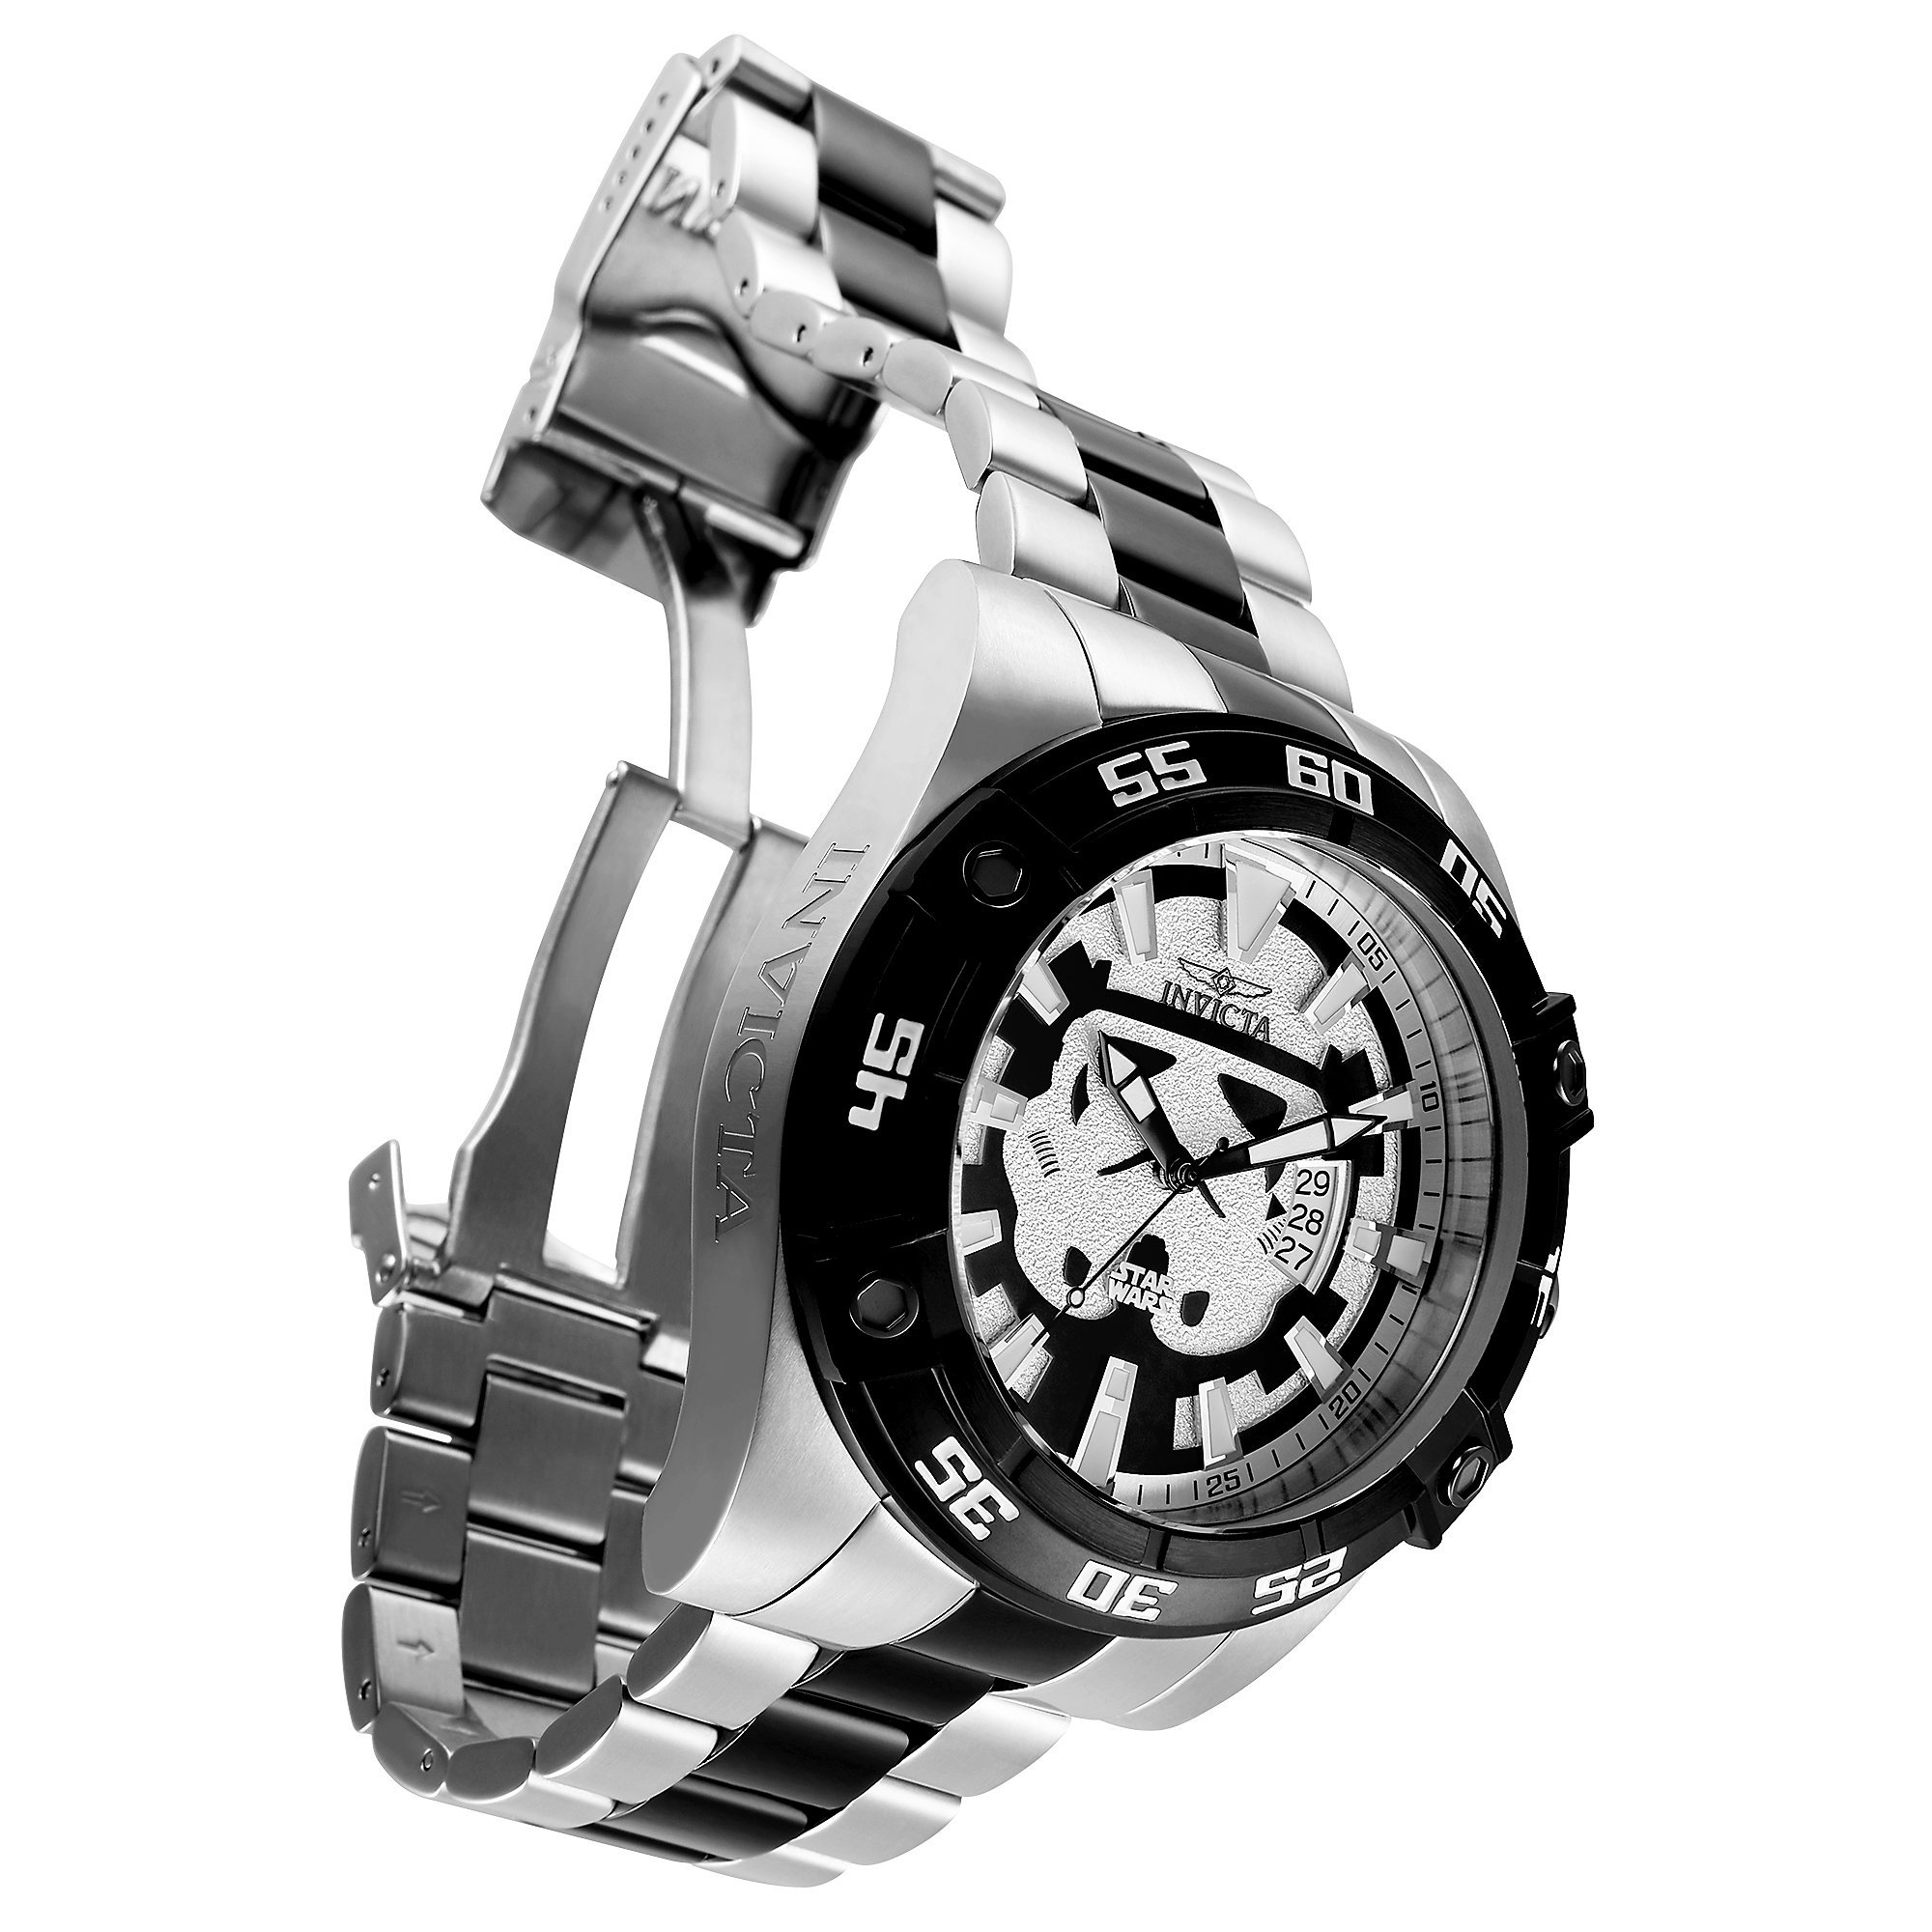 Stormtrooper Watch for Men by INVICTA - Star Wars